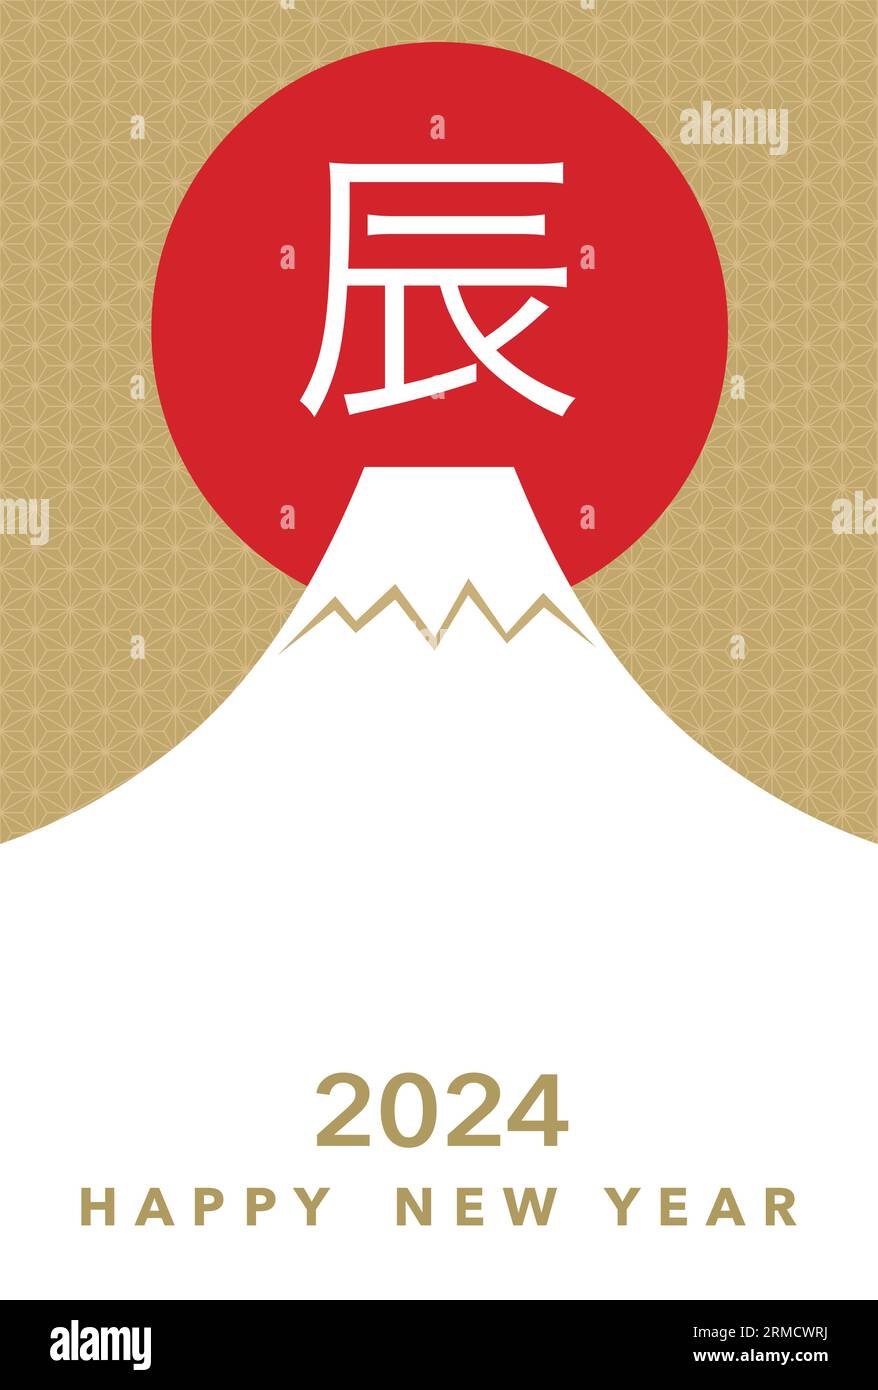 2024 New Year Greeting Card Vector Template With Snow-Covered Mt. Fuji, Rising Sun, And New Year’s Greetings Decorated With Vintage Japanese Patterns. Stock Vector